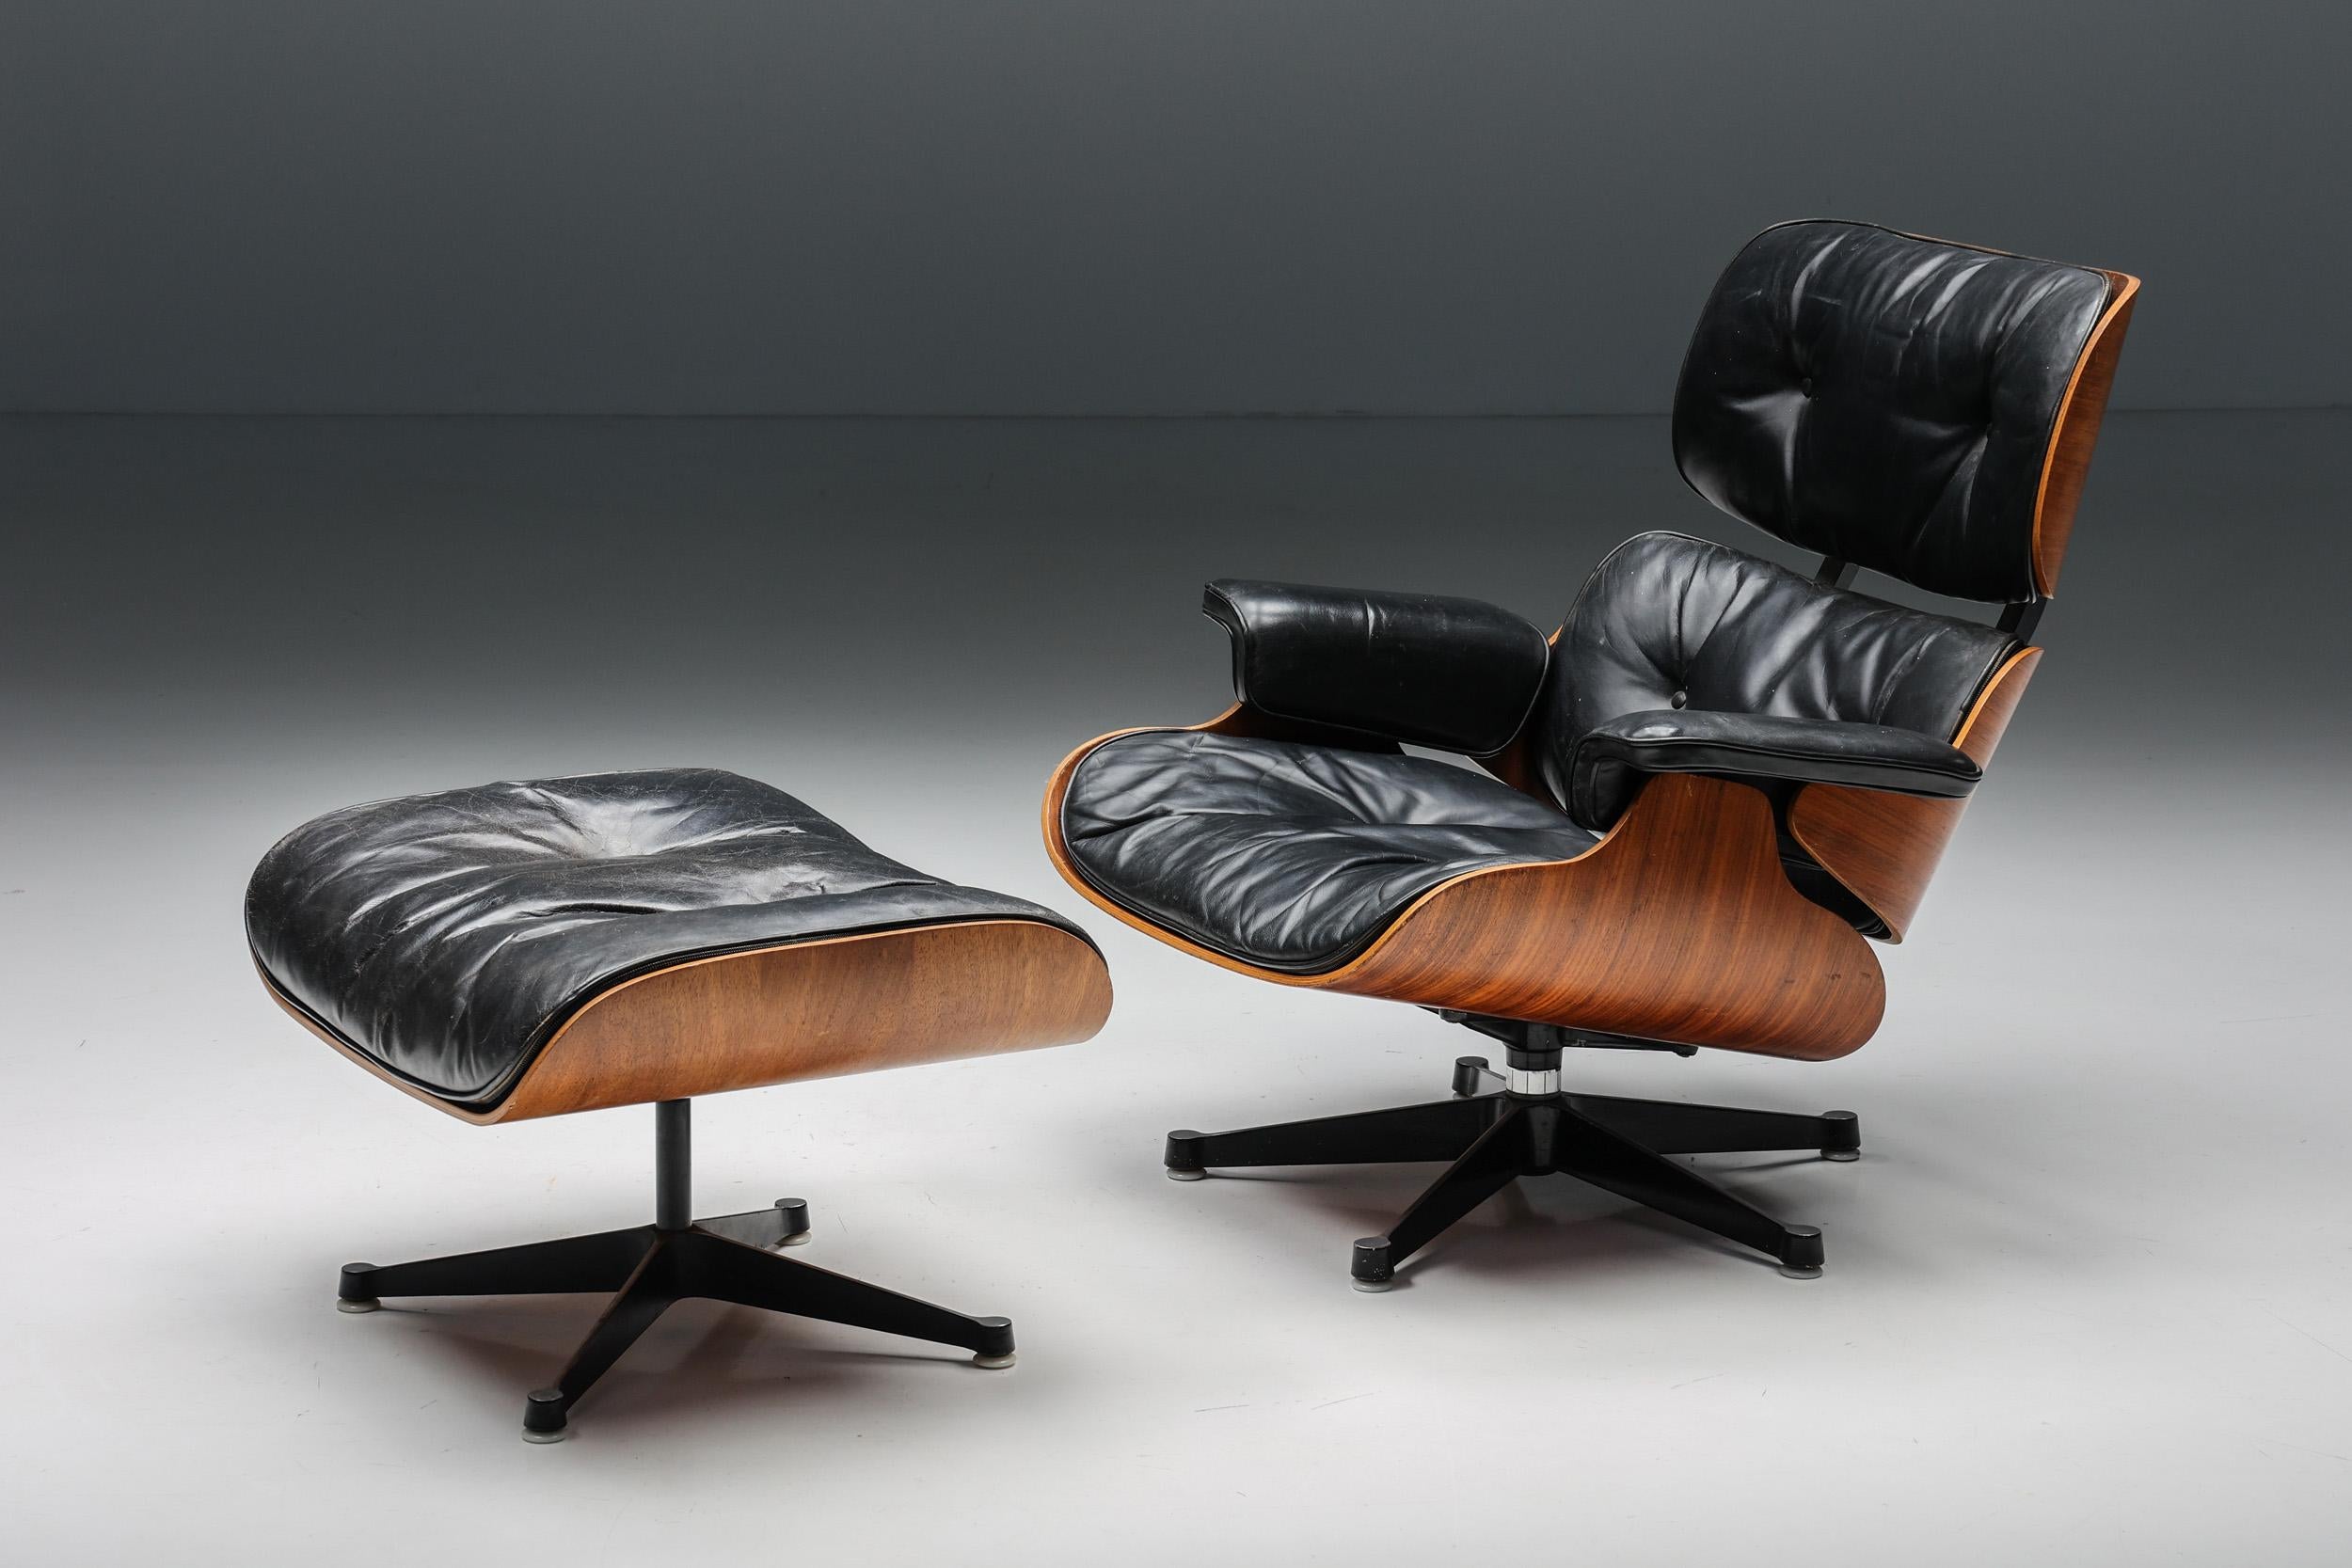 Eames; Herman Miller; Charles & Ray Eames; Mid-Century Modern, Lounge Chair; Ottoman; Iconic Design; Historical Furniture; Collector's Item; Design Classic; Herman Miller Collection; 1957; Models 670 & 671;

Eames lounge chair & ottoman, models 670